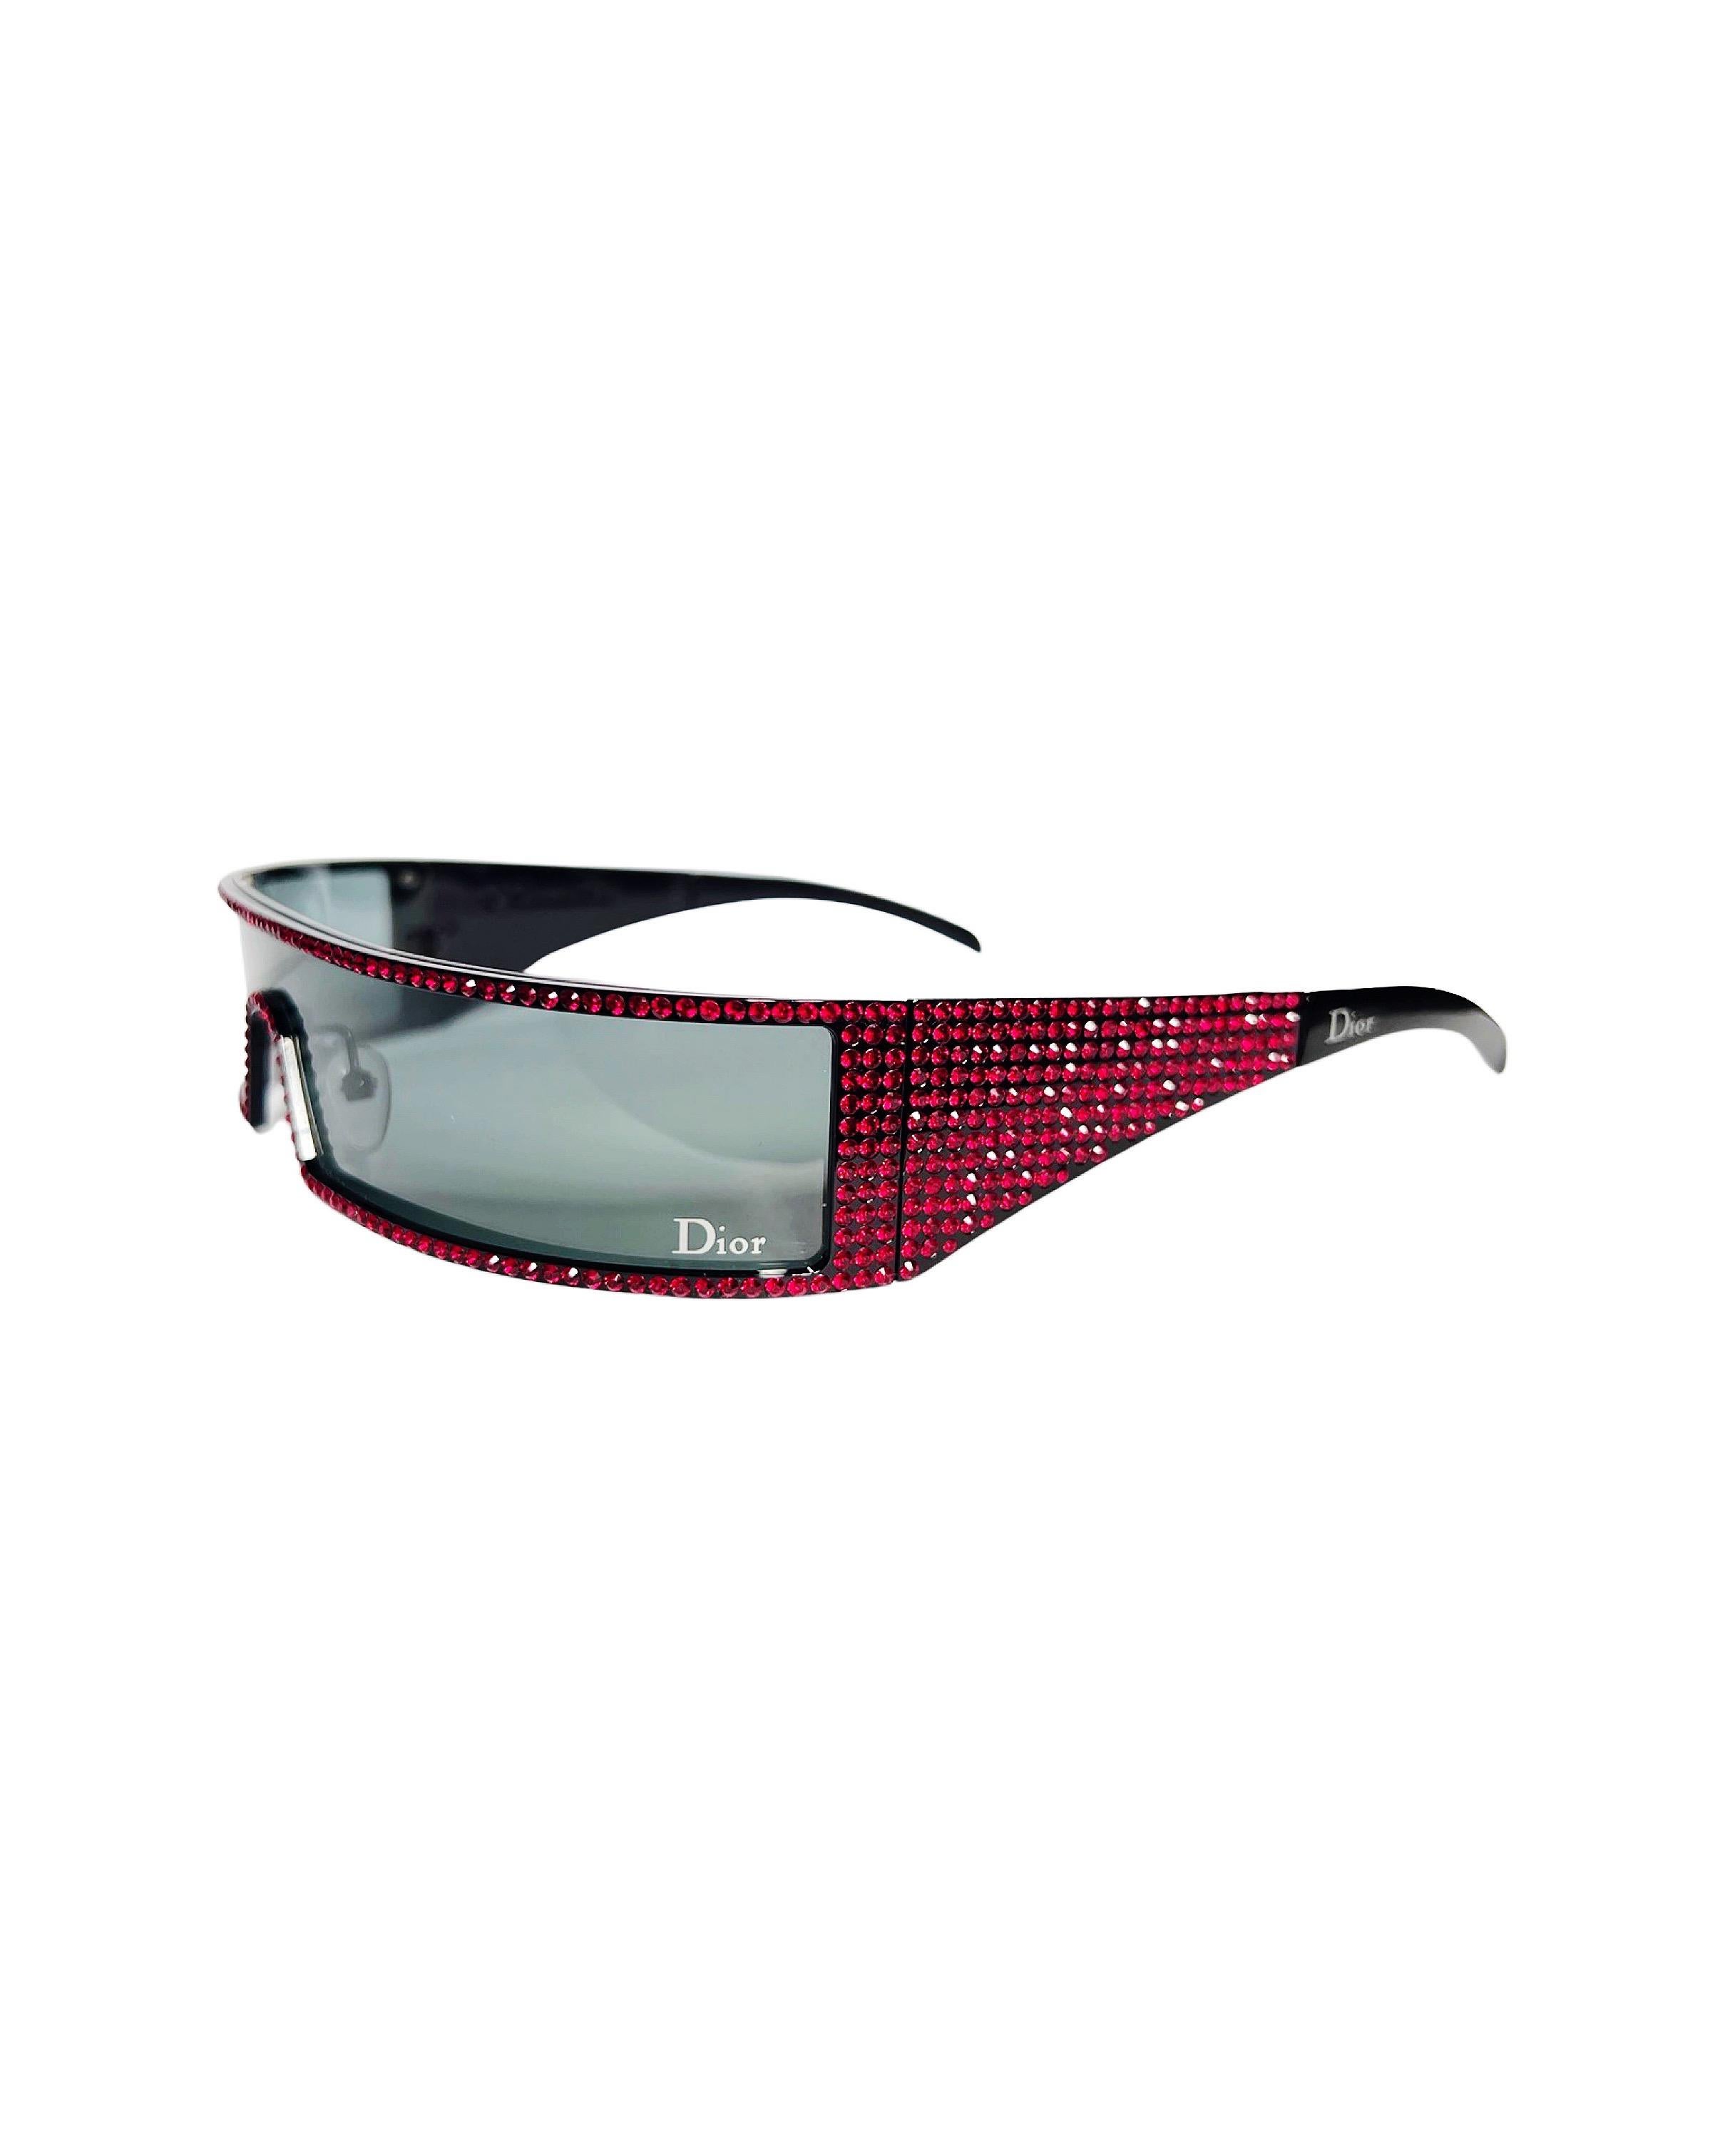 One of the rarest, limited edition Dior sunglasses by John Galliano, Dior Punk Swarovski sunglasses embellished with a few hundreds of red Swarovski crystals.

Excellent vintage condition, never used, still with stickers (stickers were removed for a